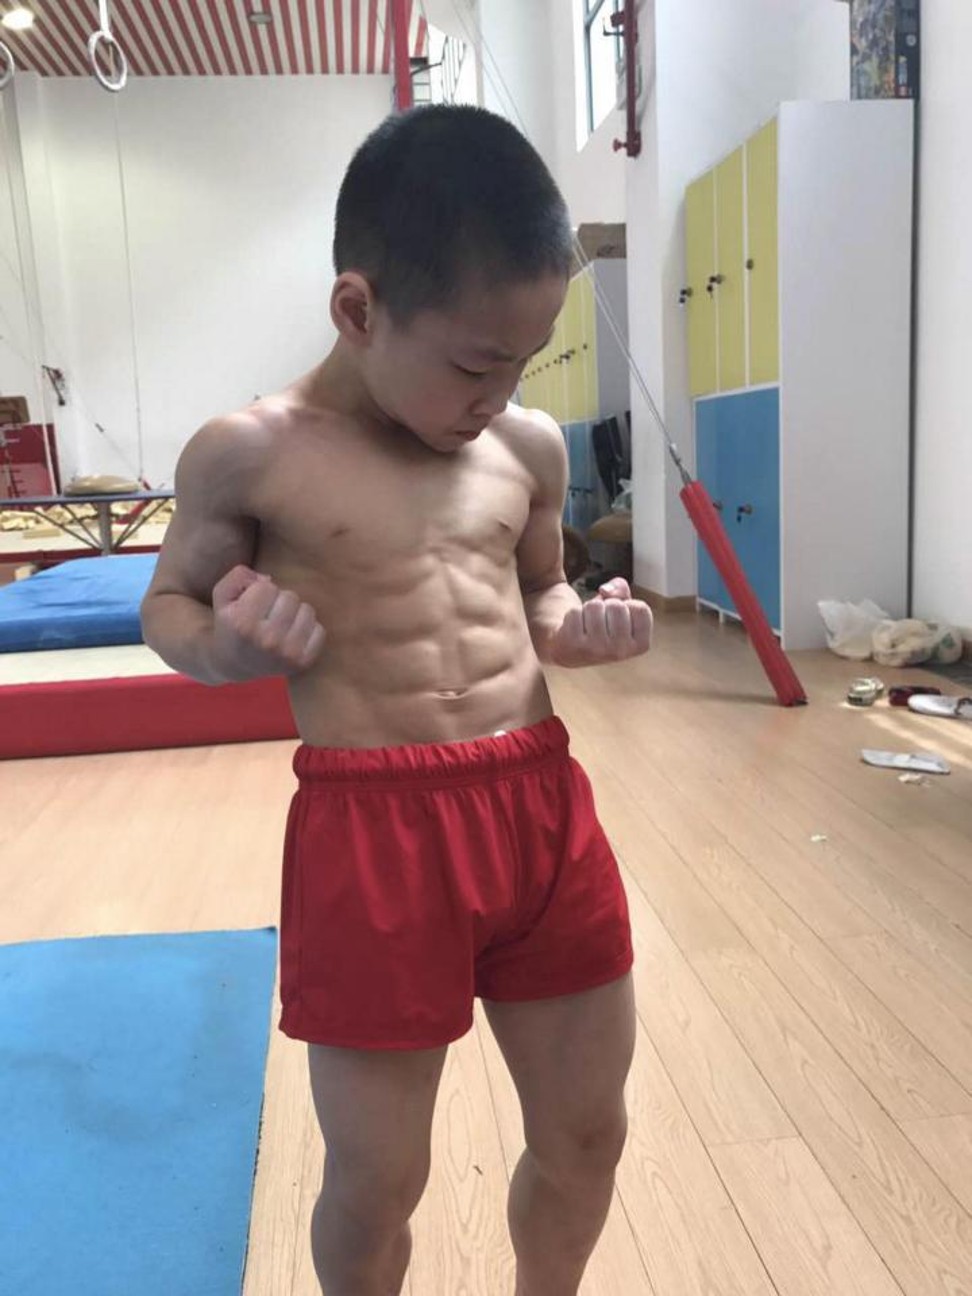 Internet users raised concerns that the training would affect Chen’s body development. Photo: Handout